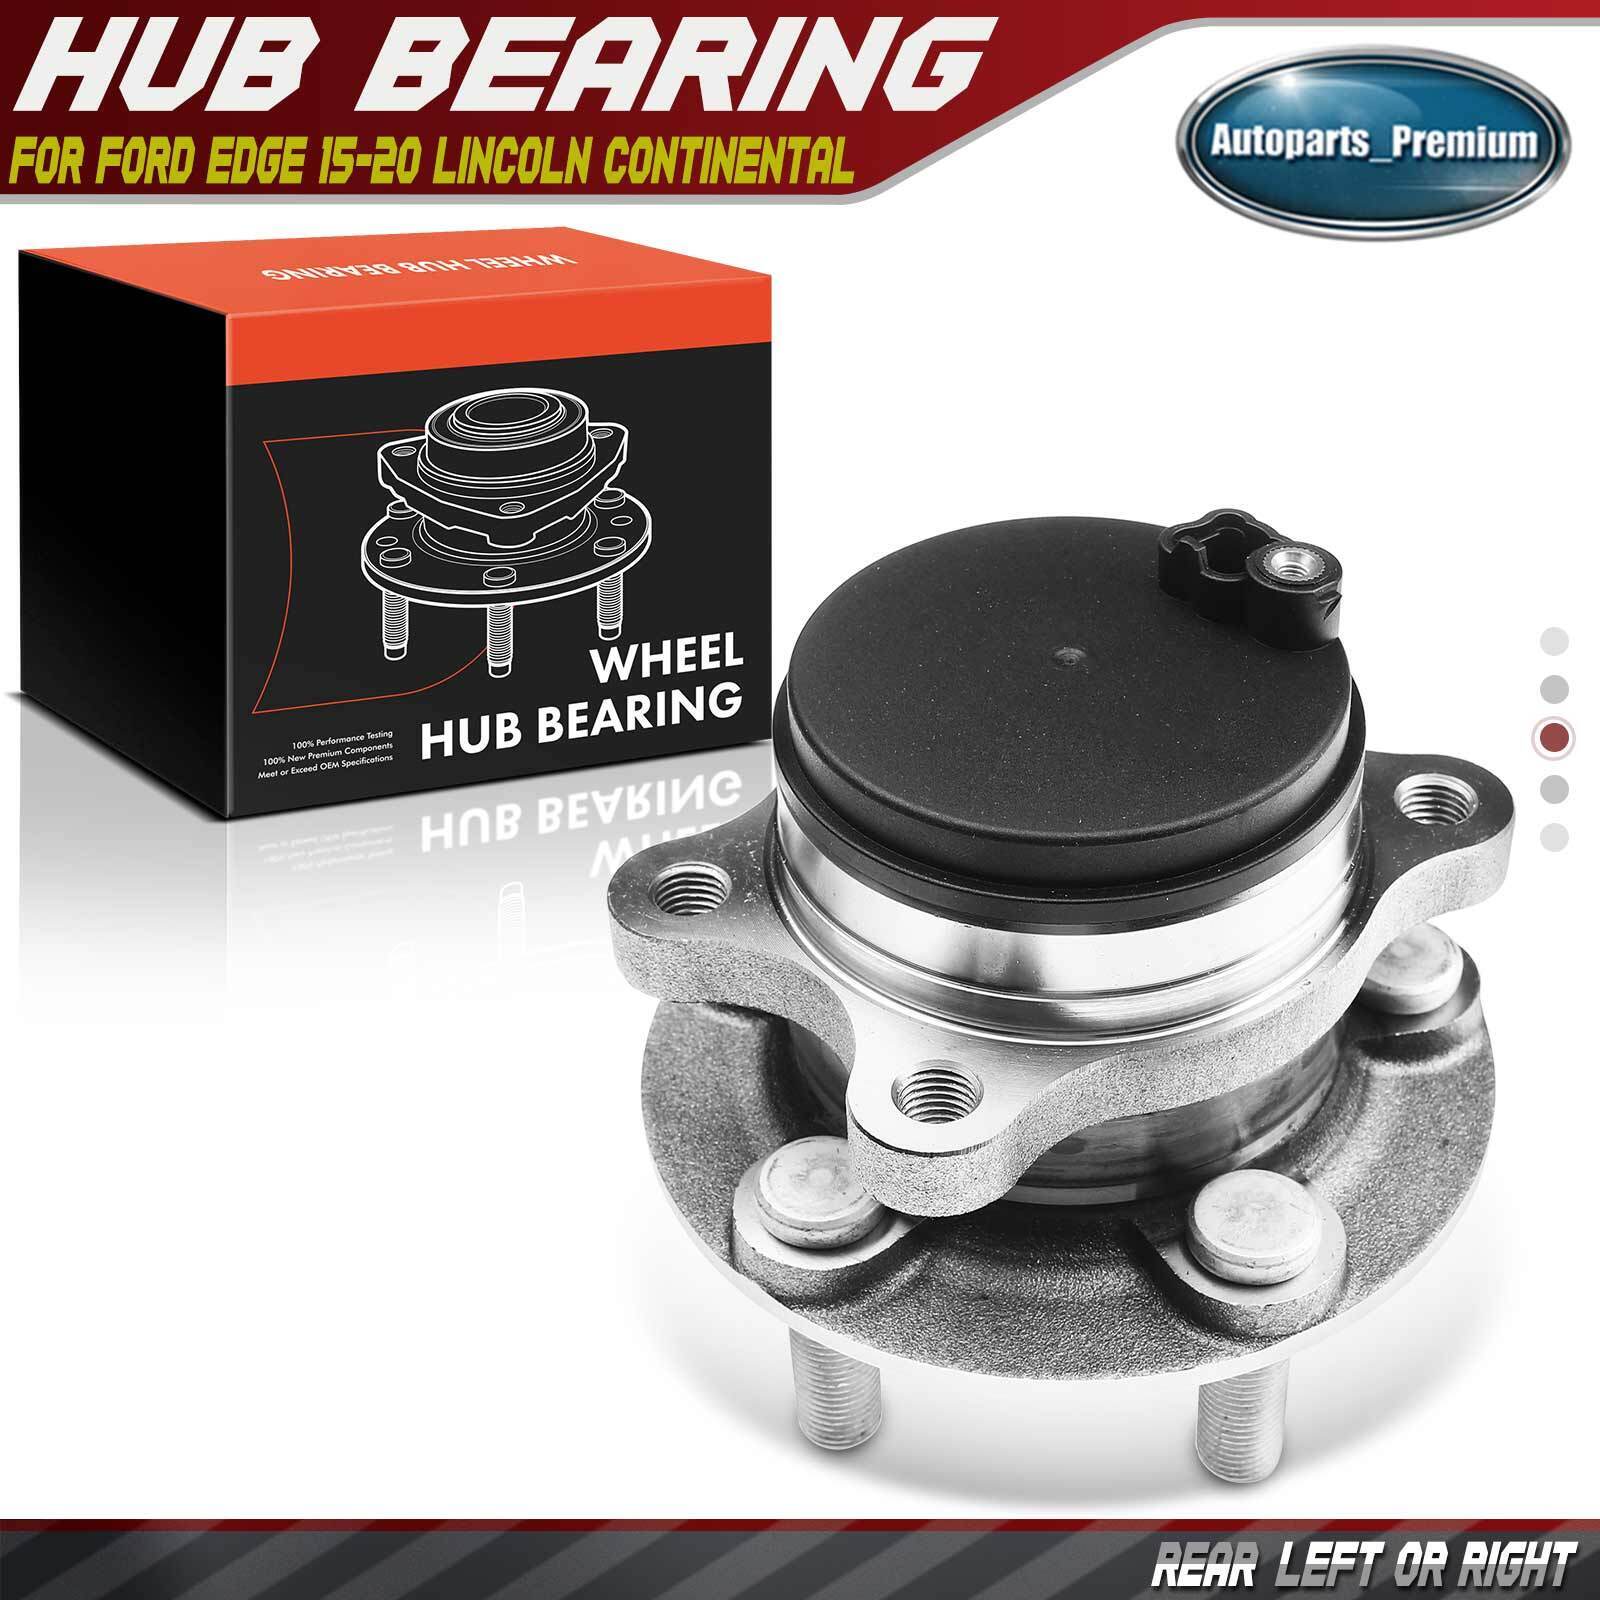 Rear LH/RH Wheel Hub Bearing Assembly for Ford Edge Lincoln Continental MKX FWD